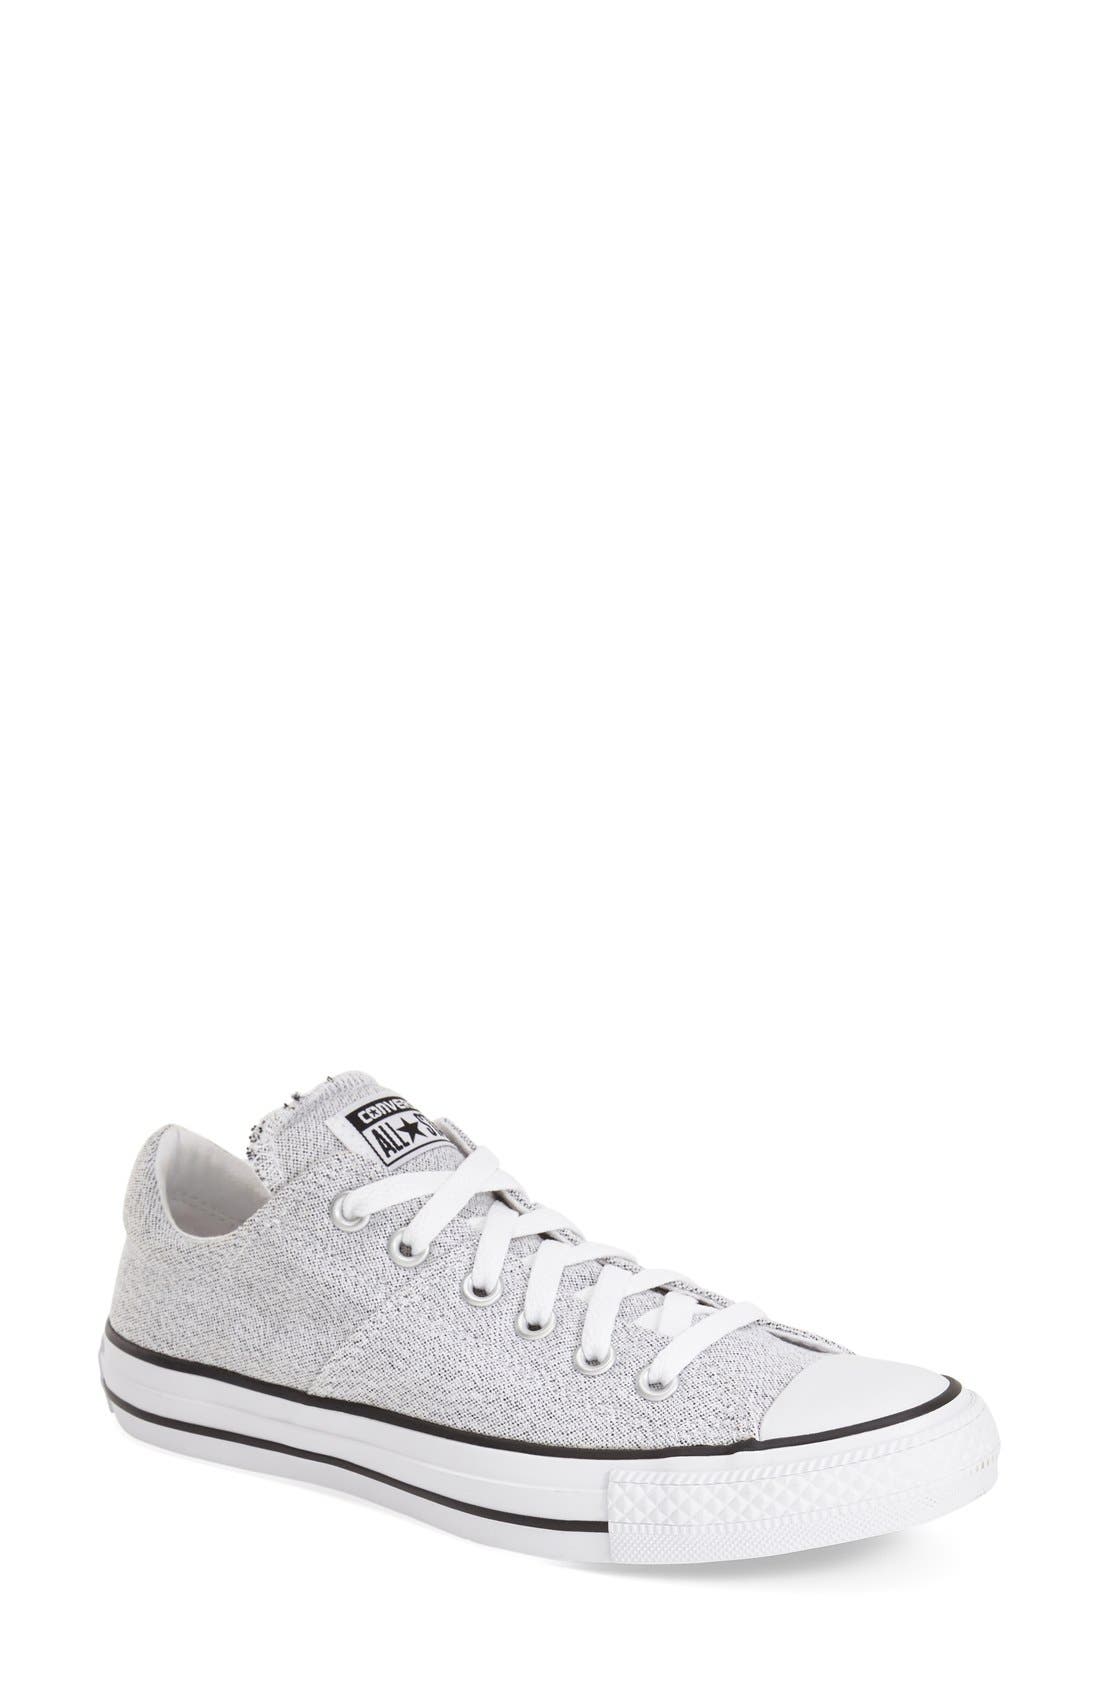 converse women's chuck taylor all star madison low top shoes